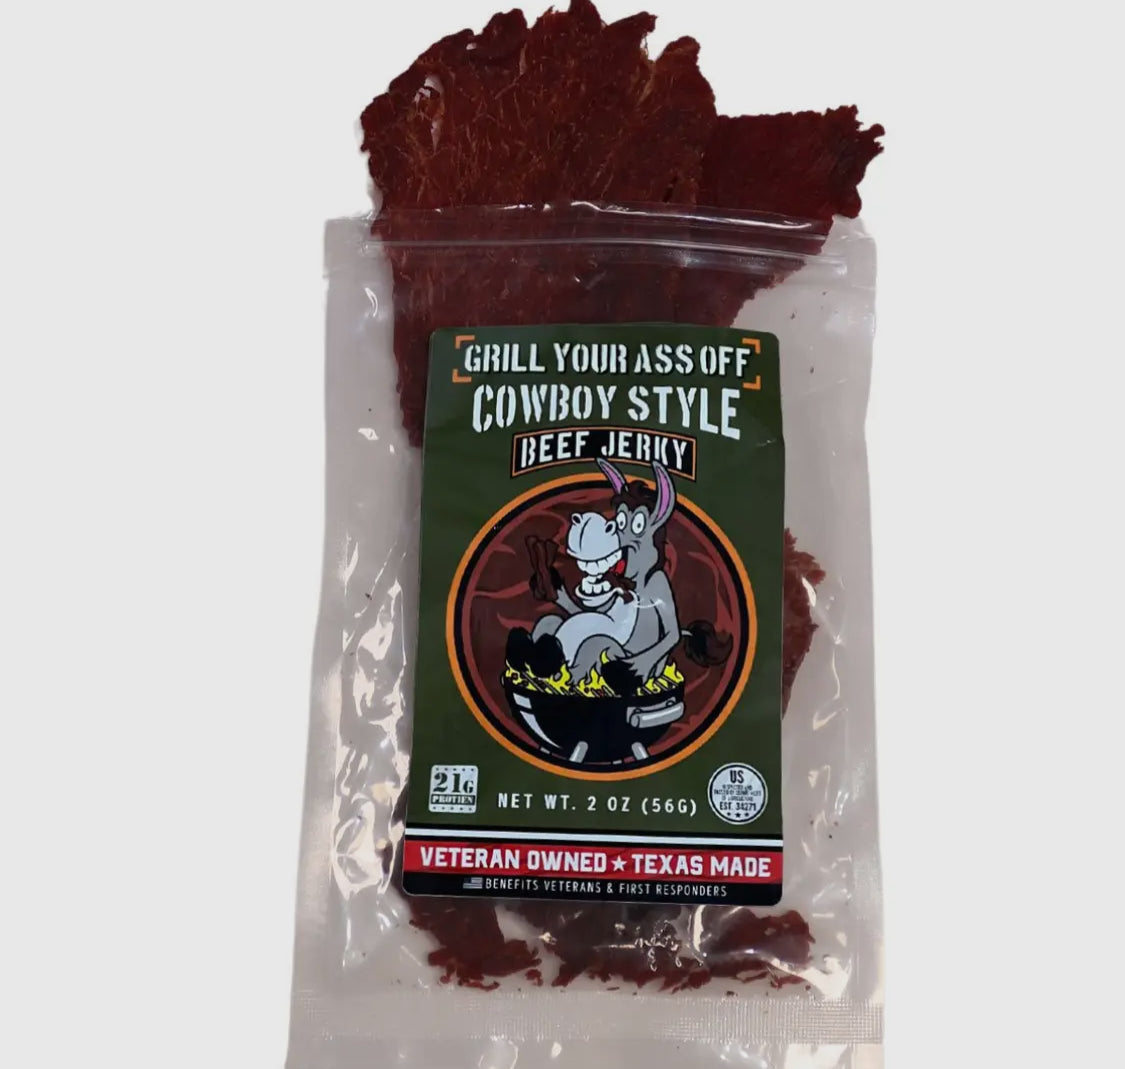 Grill Your Ass Off Beef Jerky